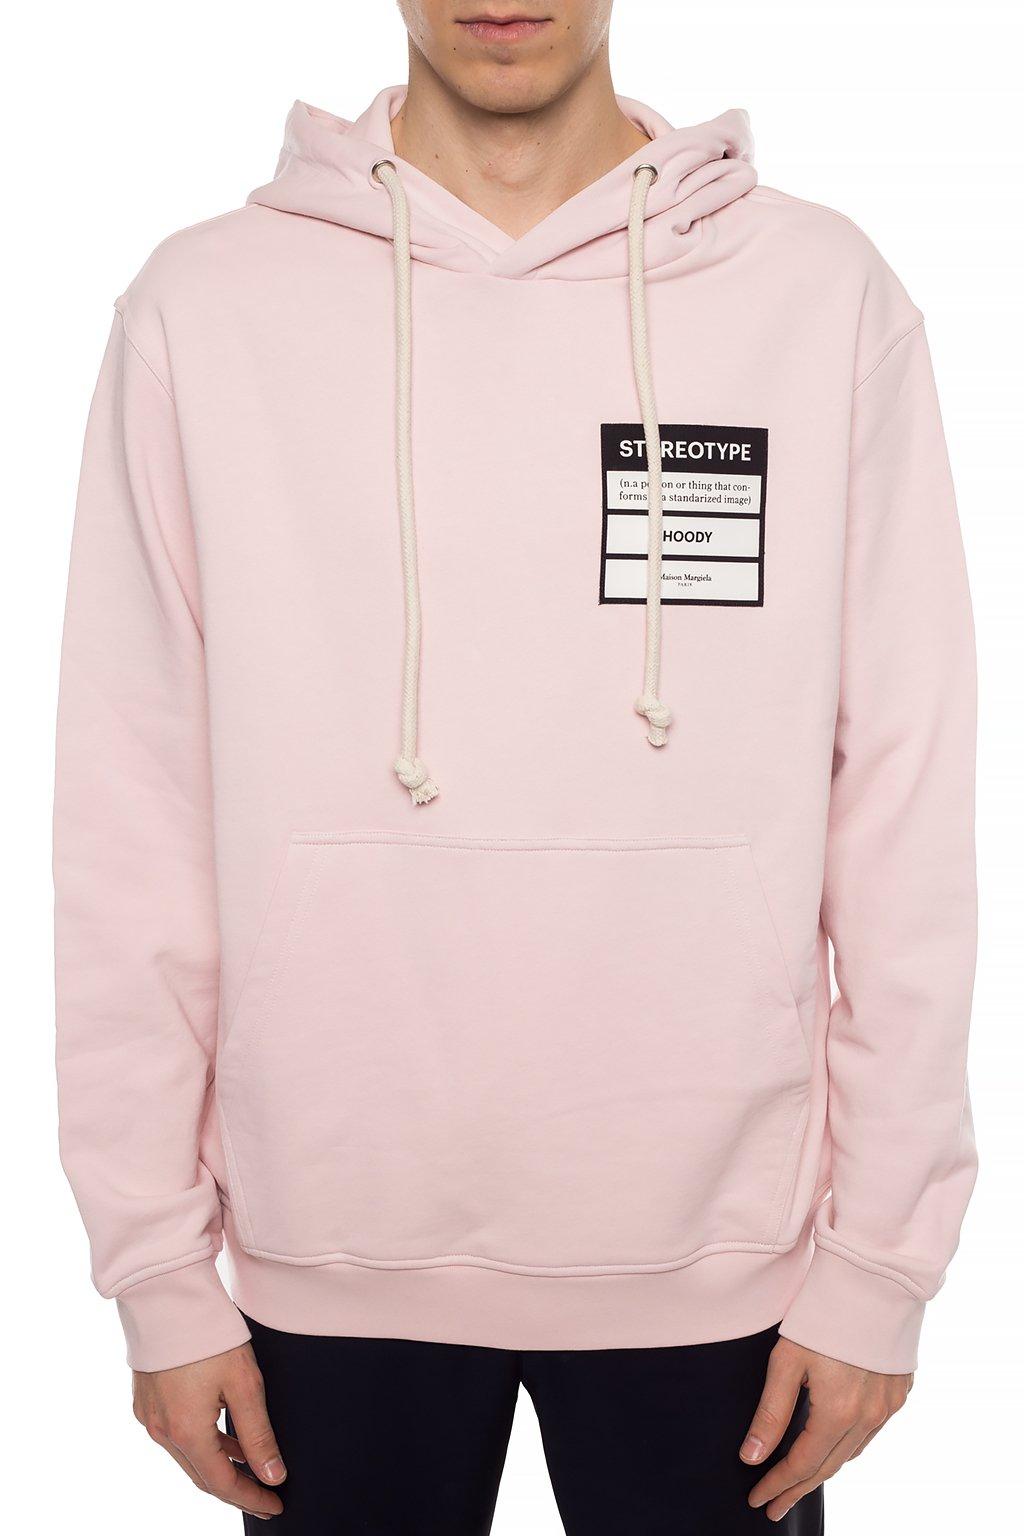 Maison Margiela Cotton 10 Stereotype Popover Hoody in Pink for Men - Lyst